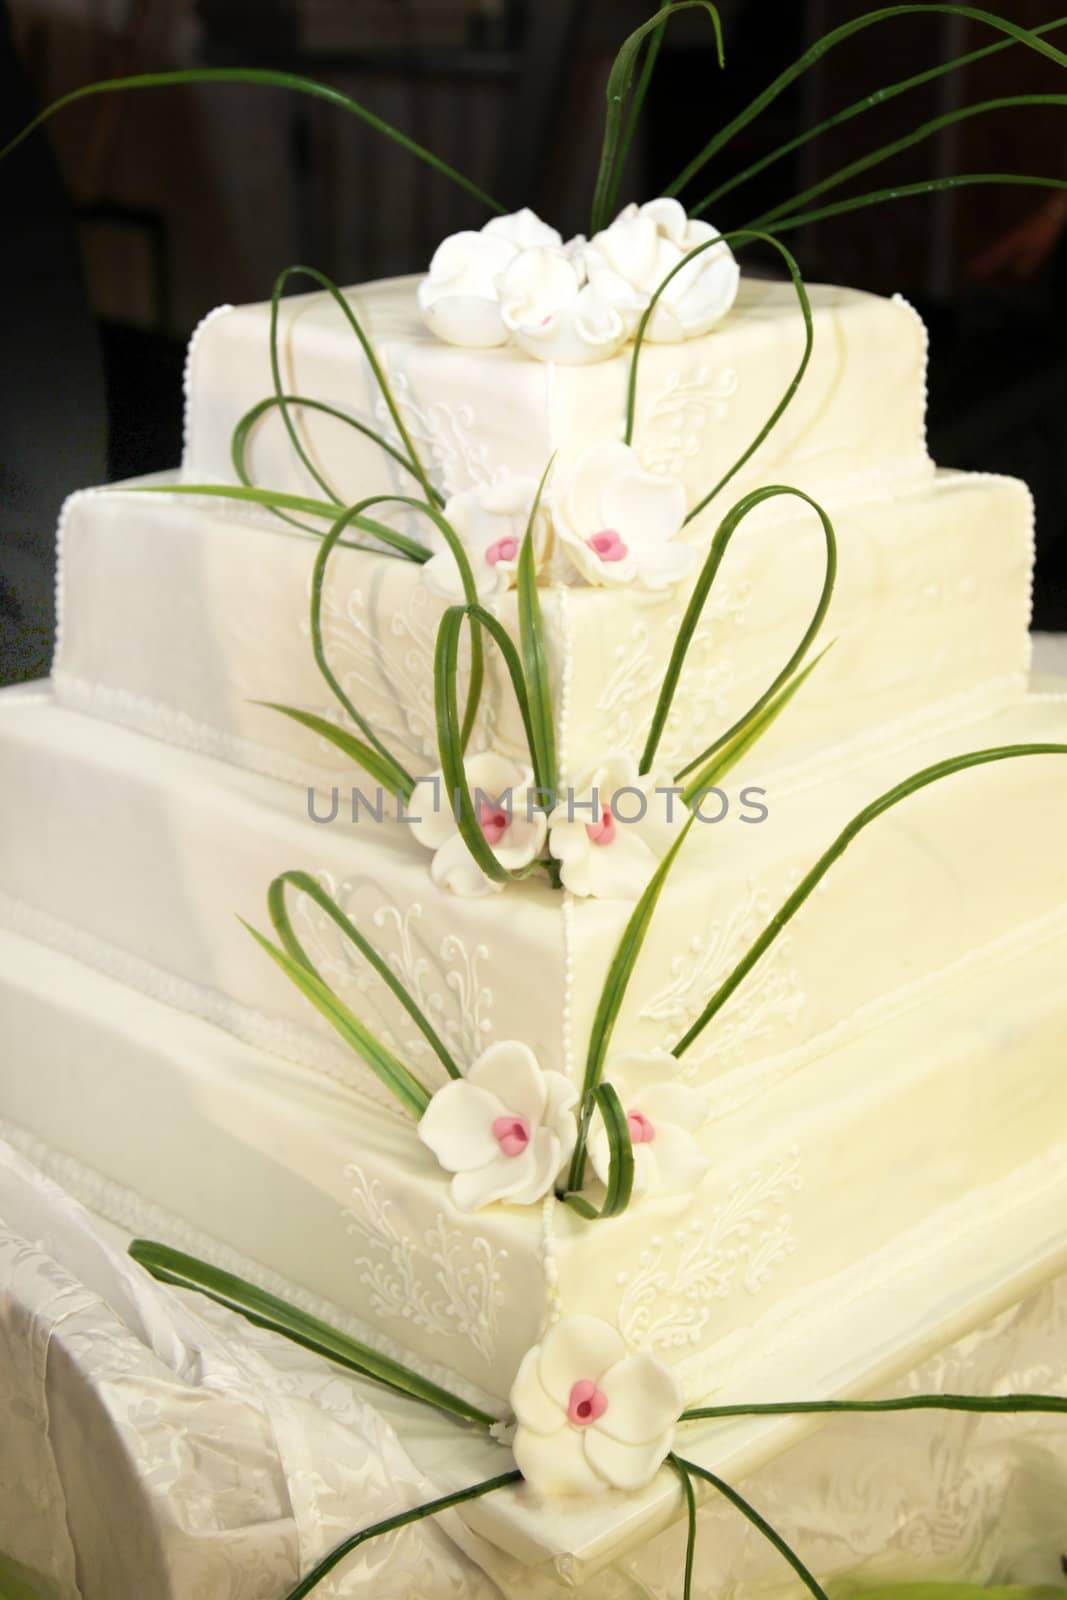 four-tiered wedding cake or birthday cake - decorated beautifully